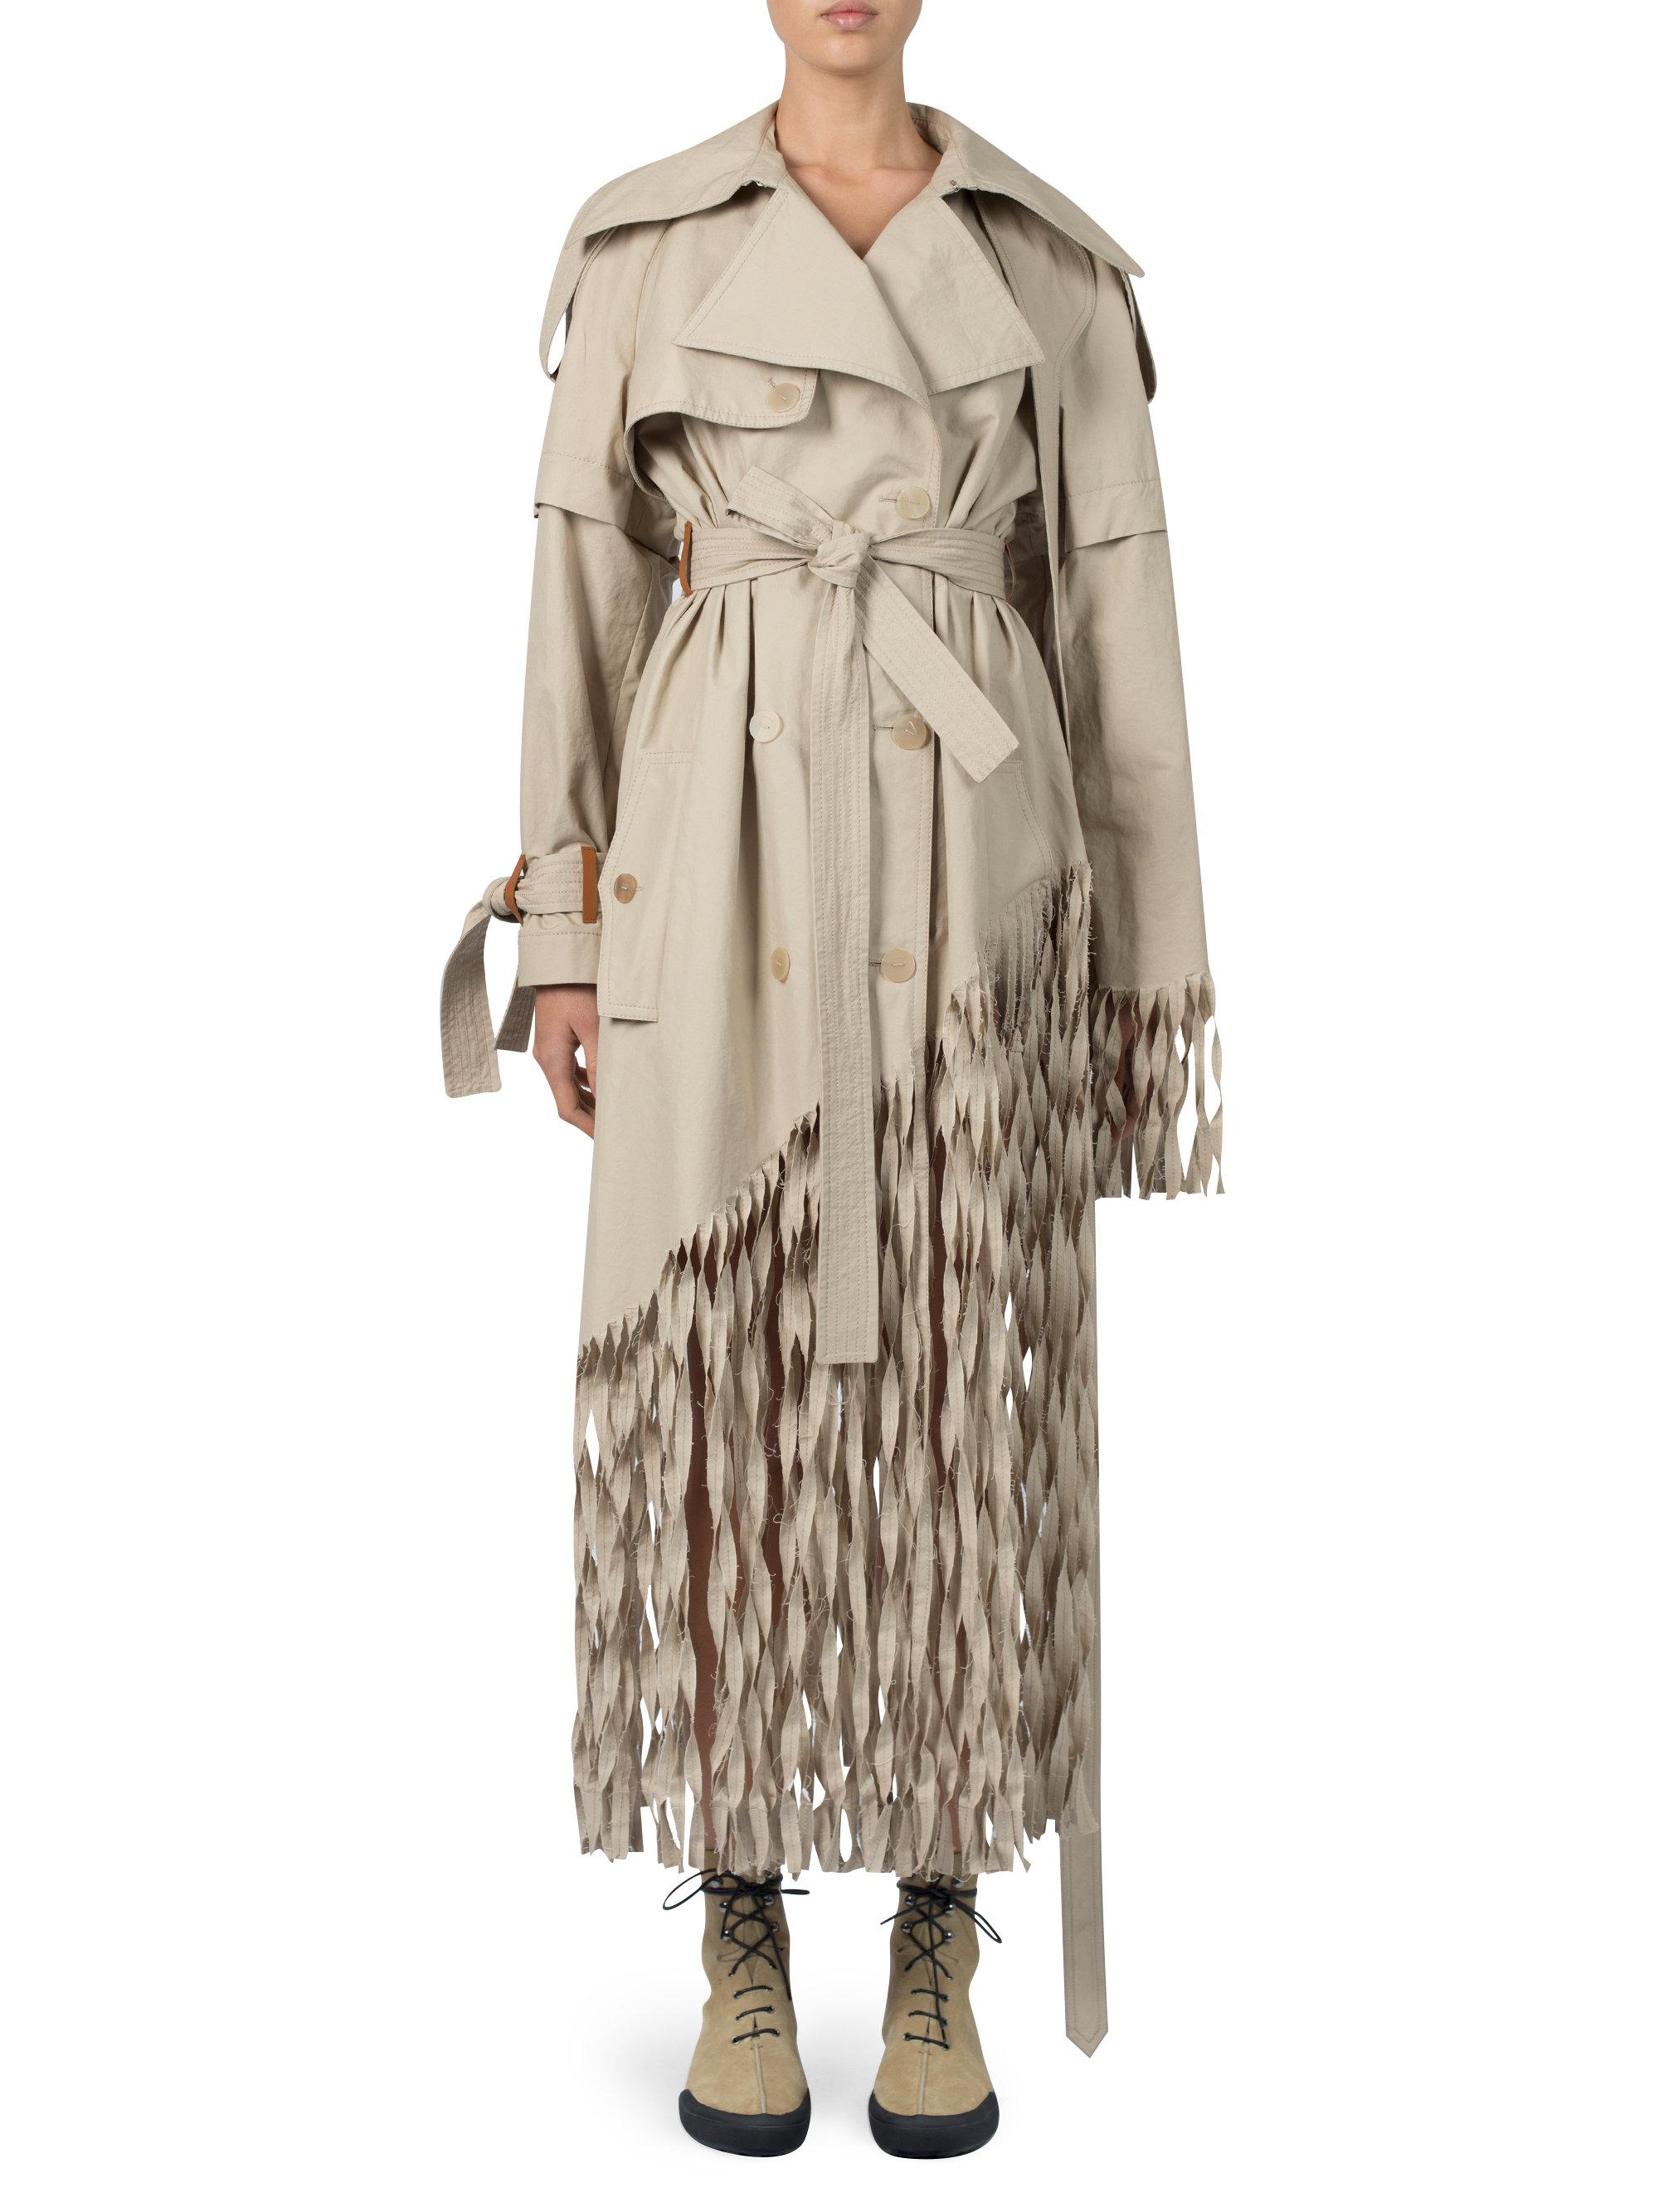 Lyst - Loewe Fringe Trench Coat in Natural